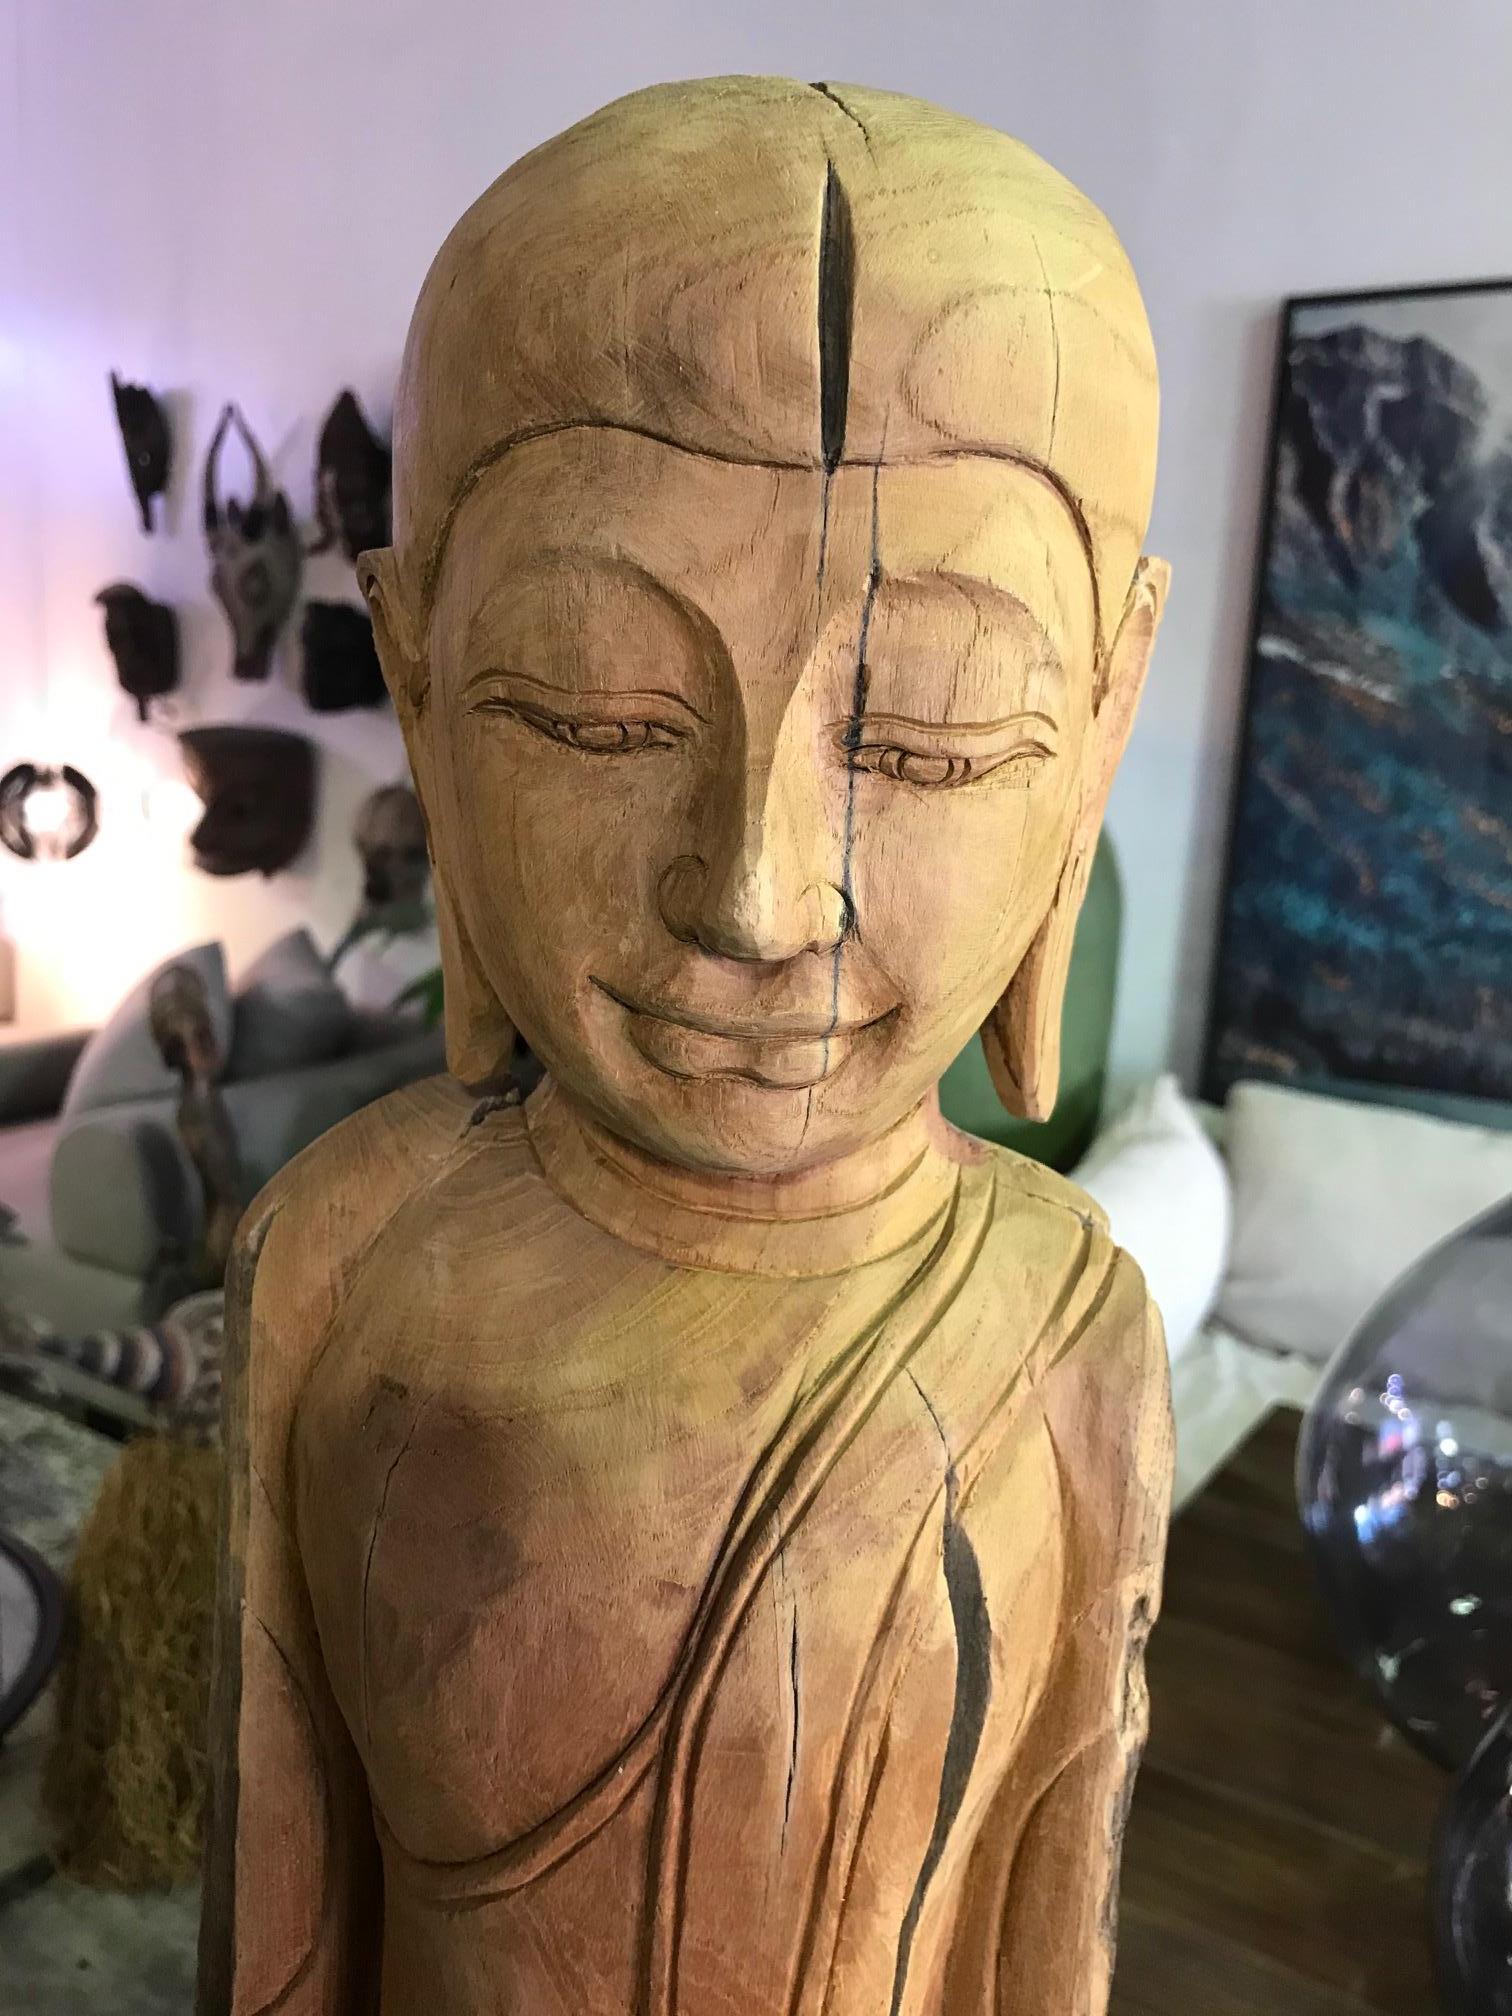 Tall hand carved wooden standing Buddha from Thailand. Beautifully carved and detailed with the wood's natural imperfections left intact. Very unusual to find like this in the figure's natural wood state and no additional adornment.

Great